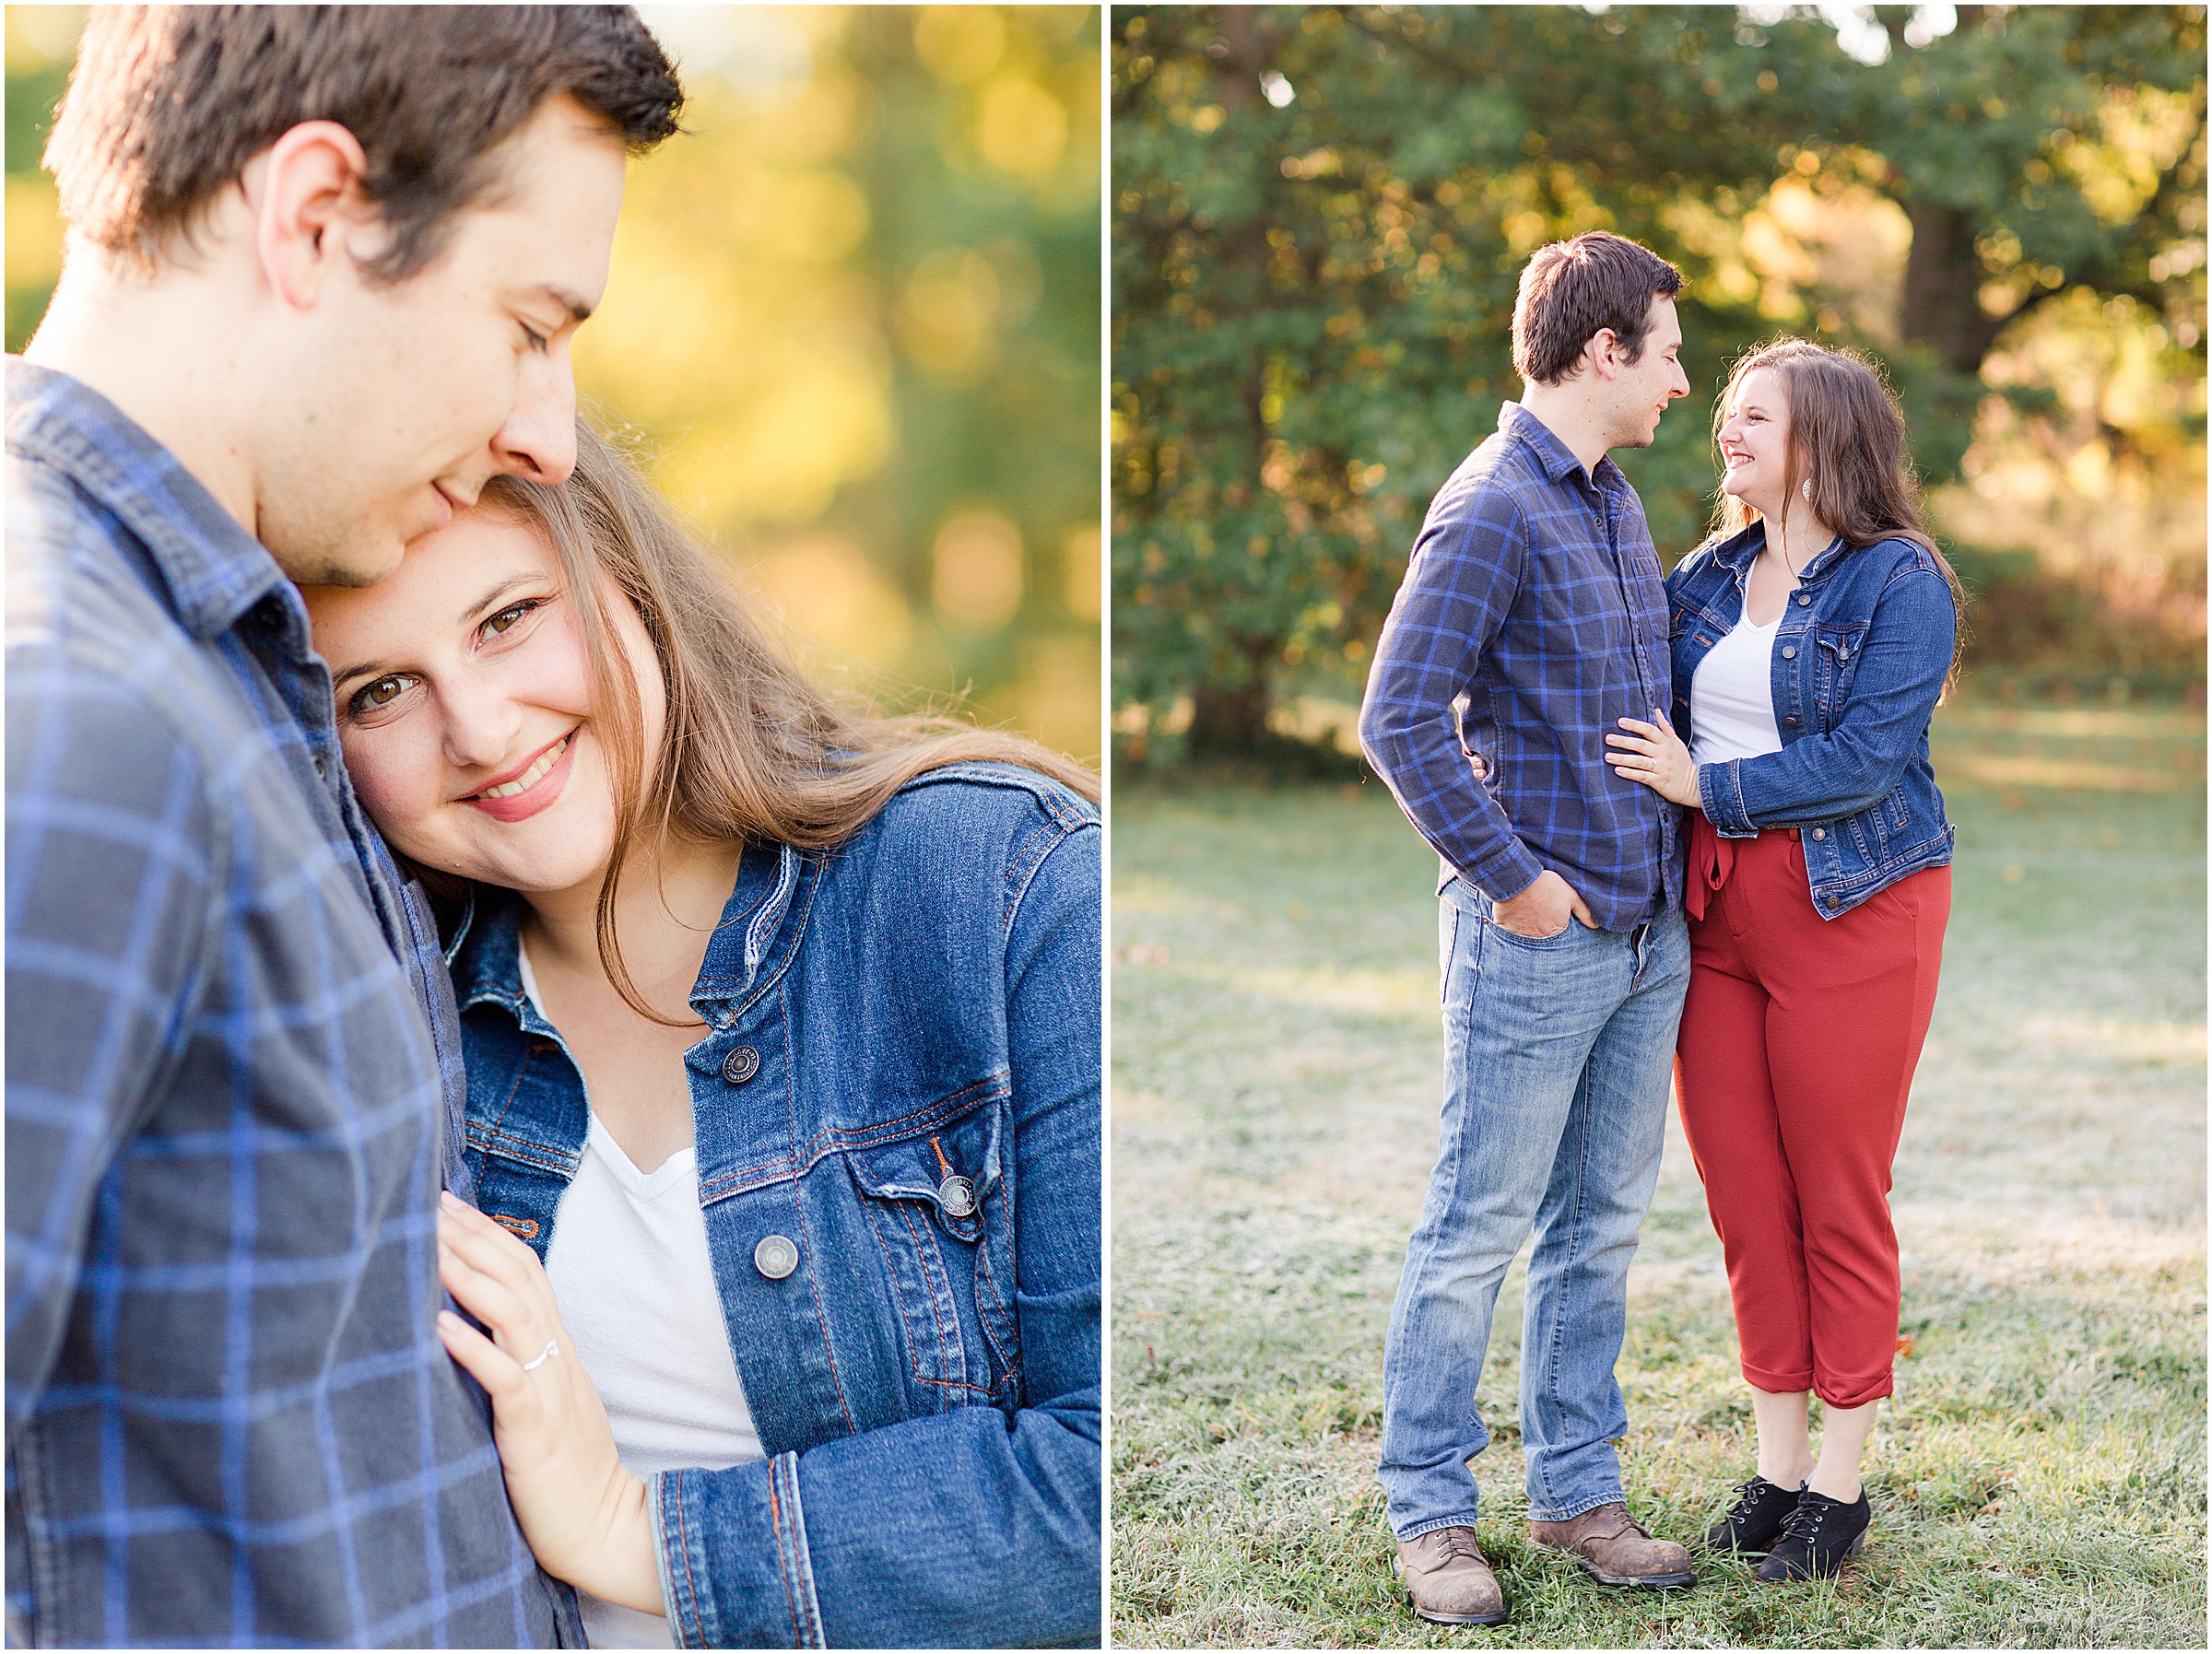 Holliday Park Engagement Session by Sami Renee_0007.jpg